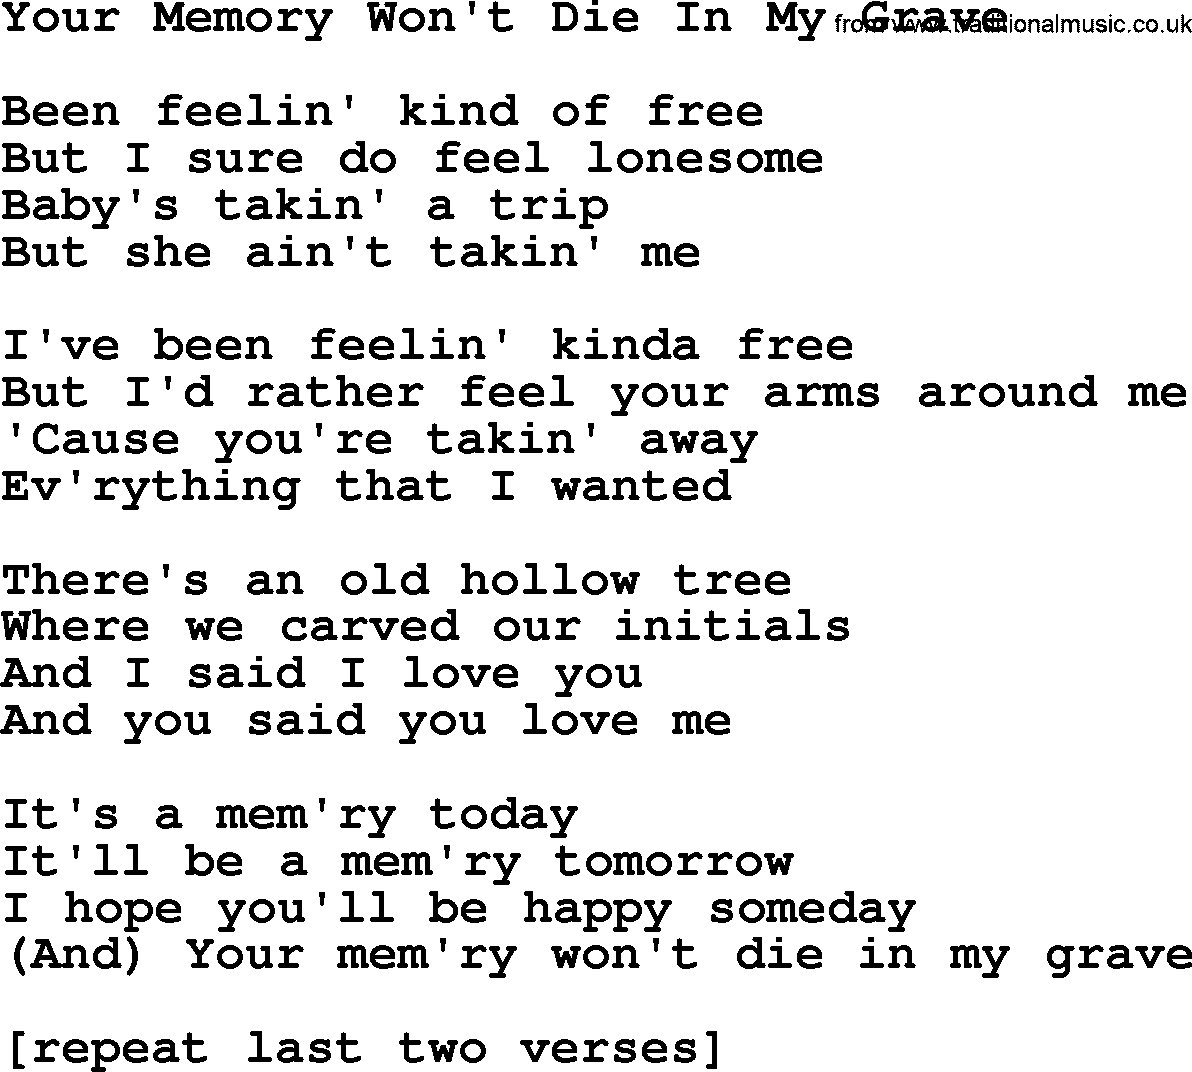 Willie Nelson song: Your Memory Won't Die In My Grave lyrics